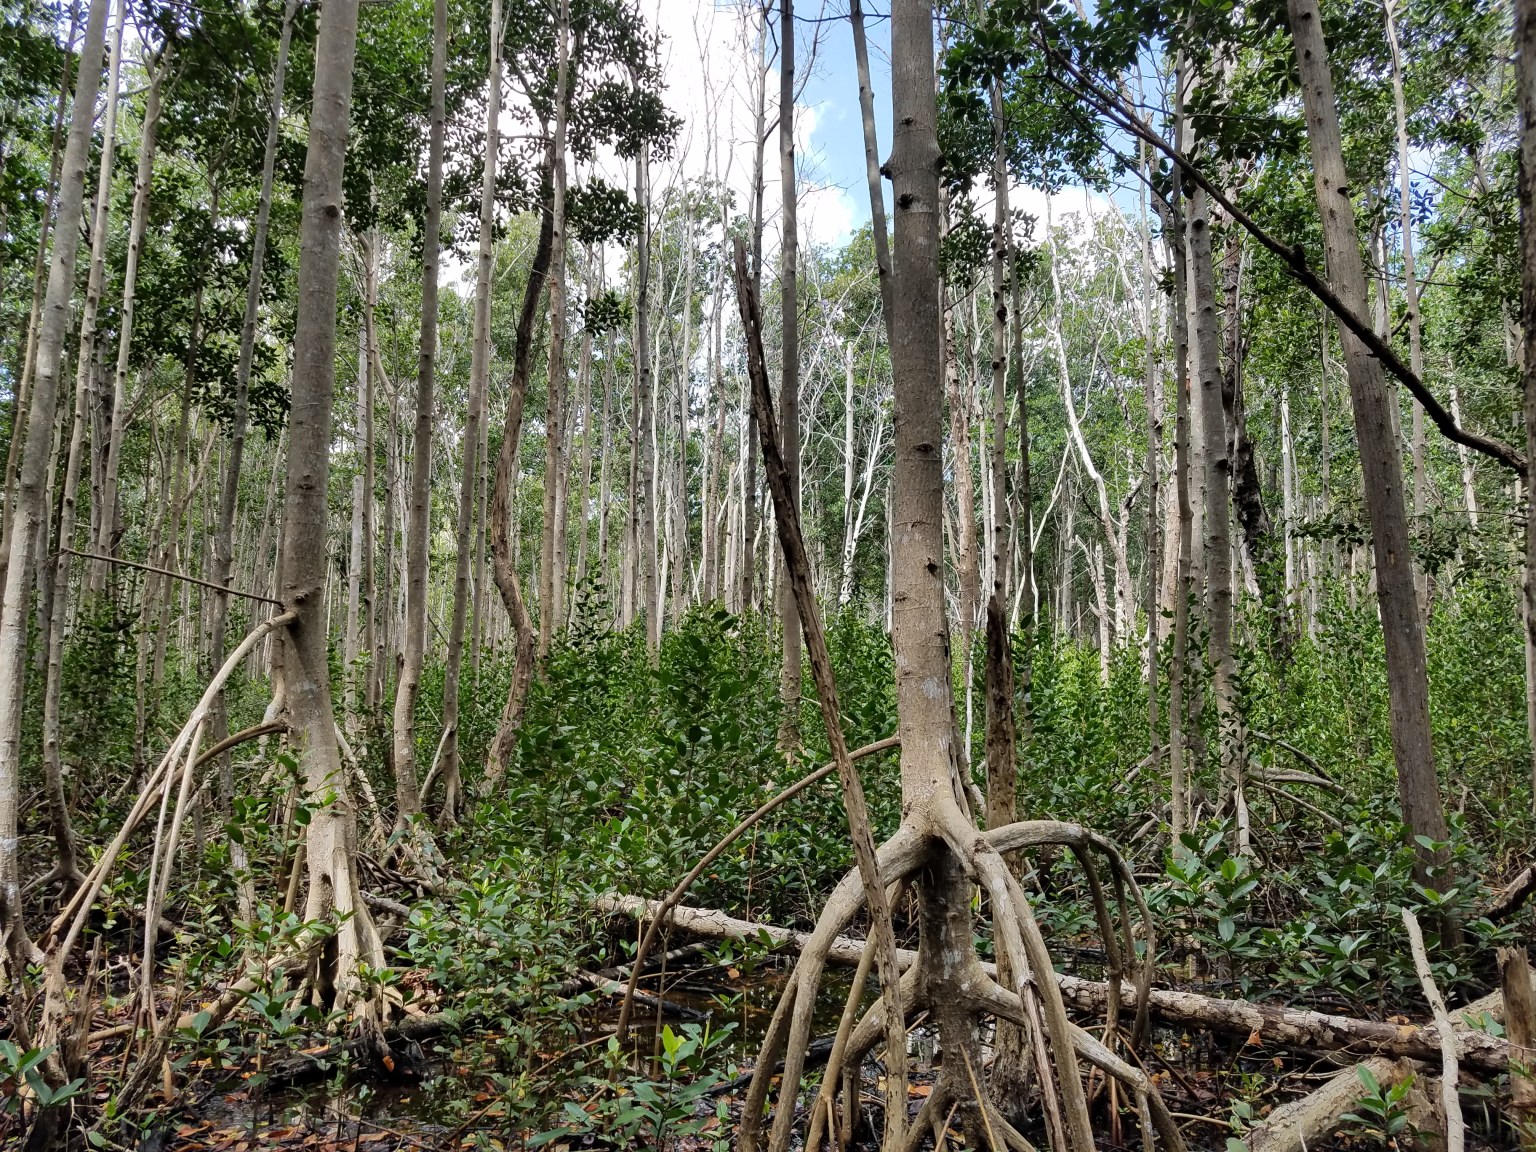 A photo of a mangrove forest in the Everglades, with many tall, slim tree trunks extending out to the horizon. The ground is wet and covered with tall, leafy plants. The mangrove trees' roots are visible above the ground like tent frames.